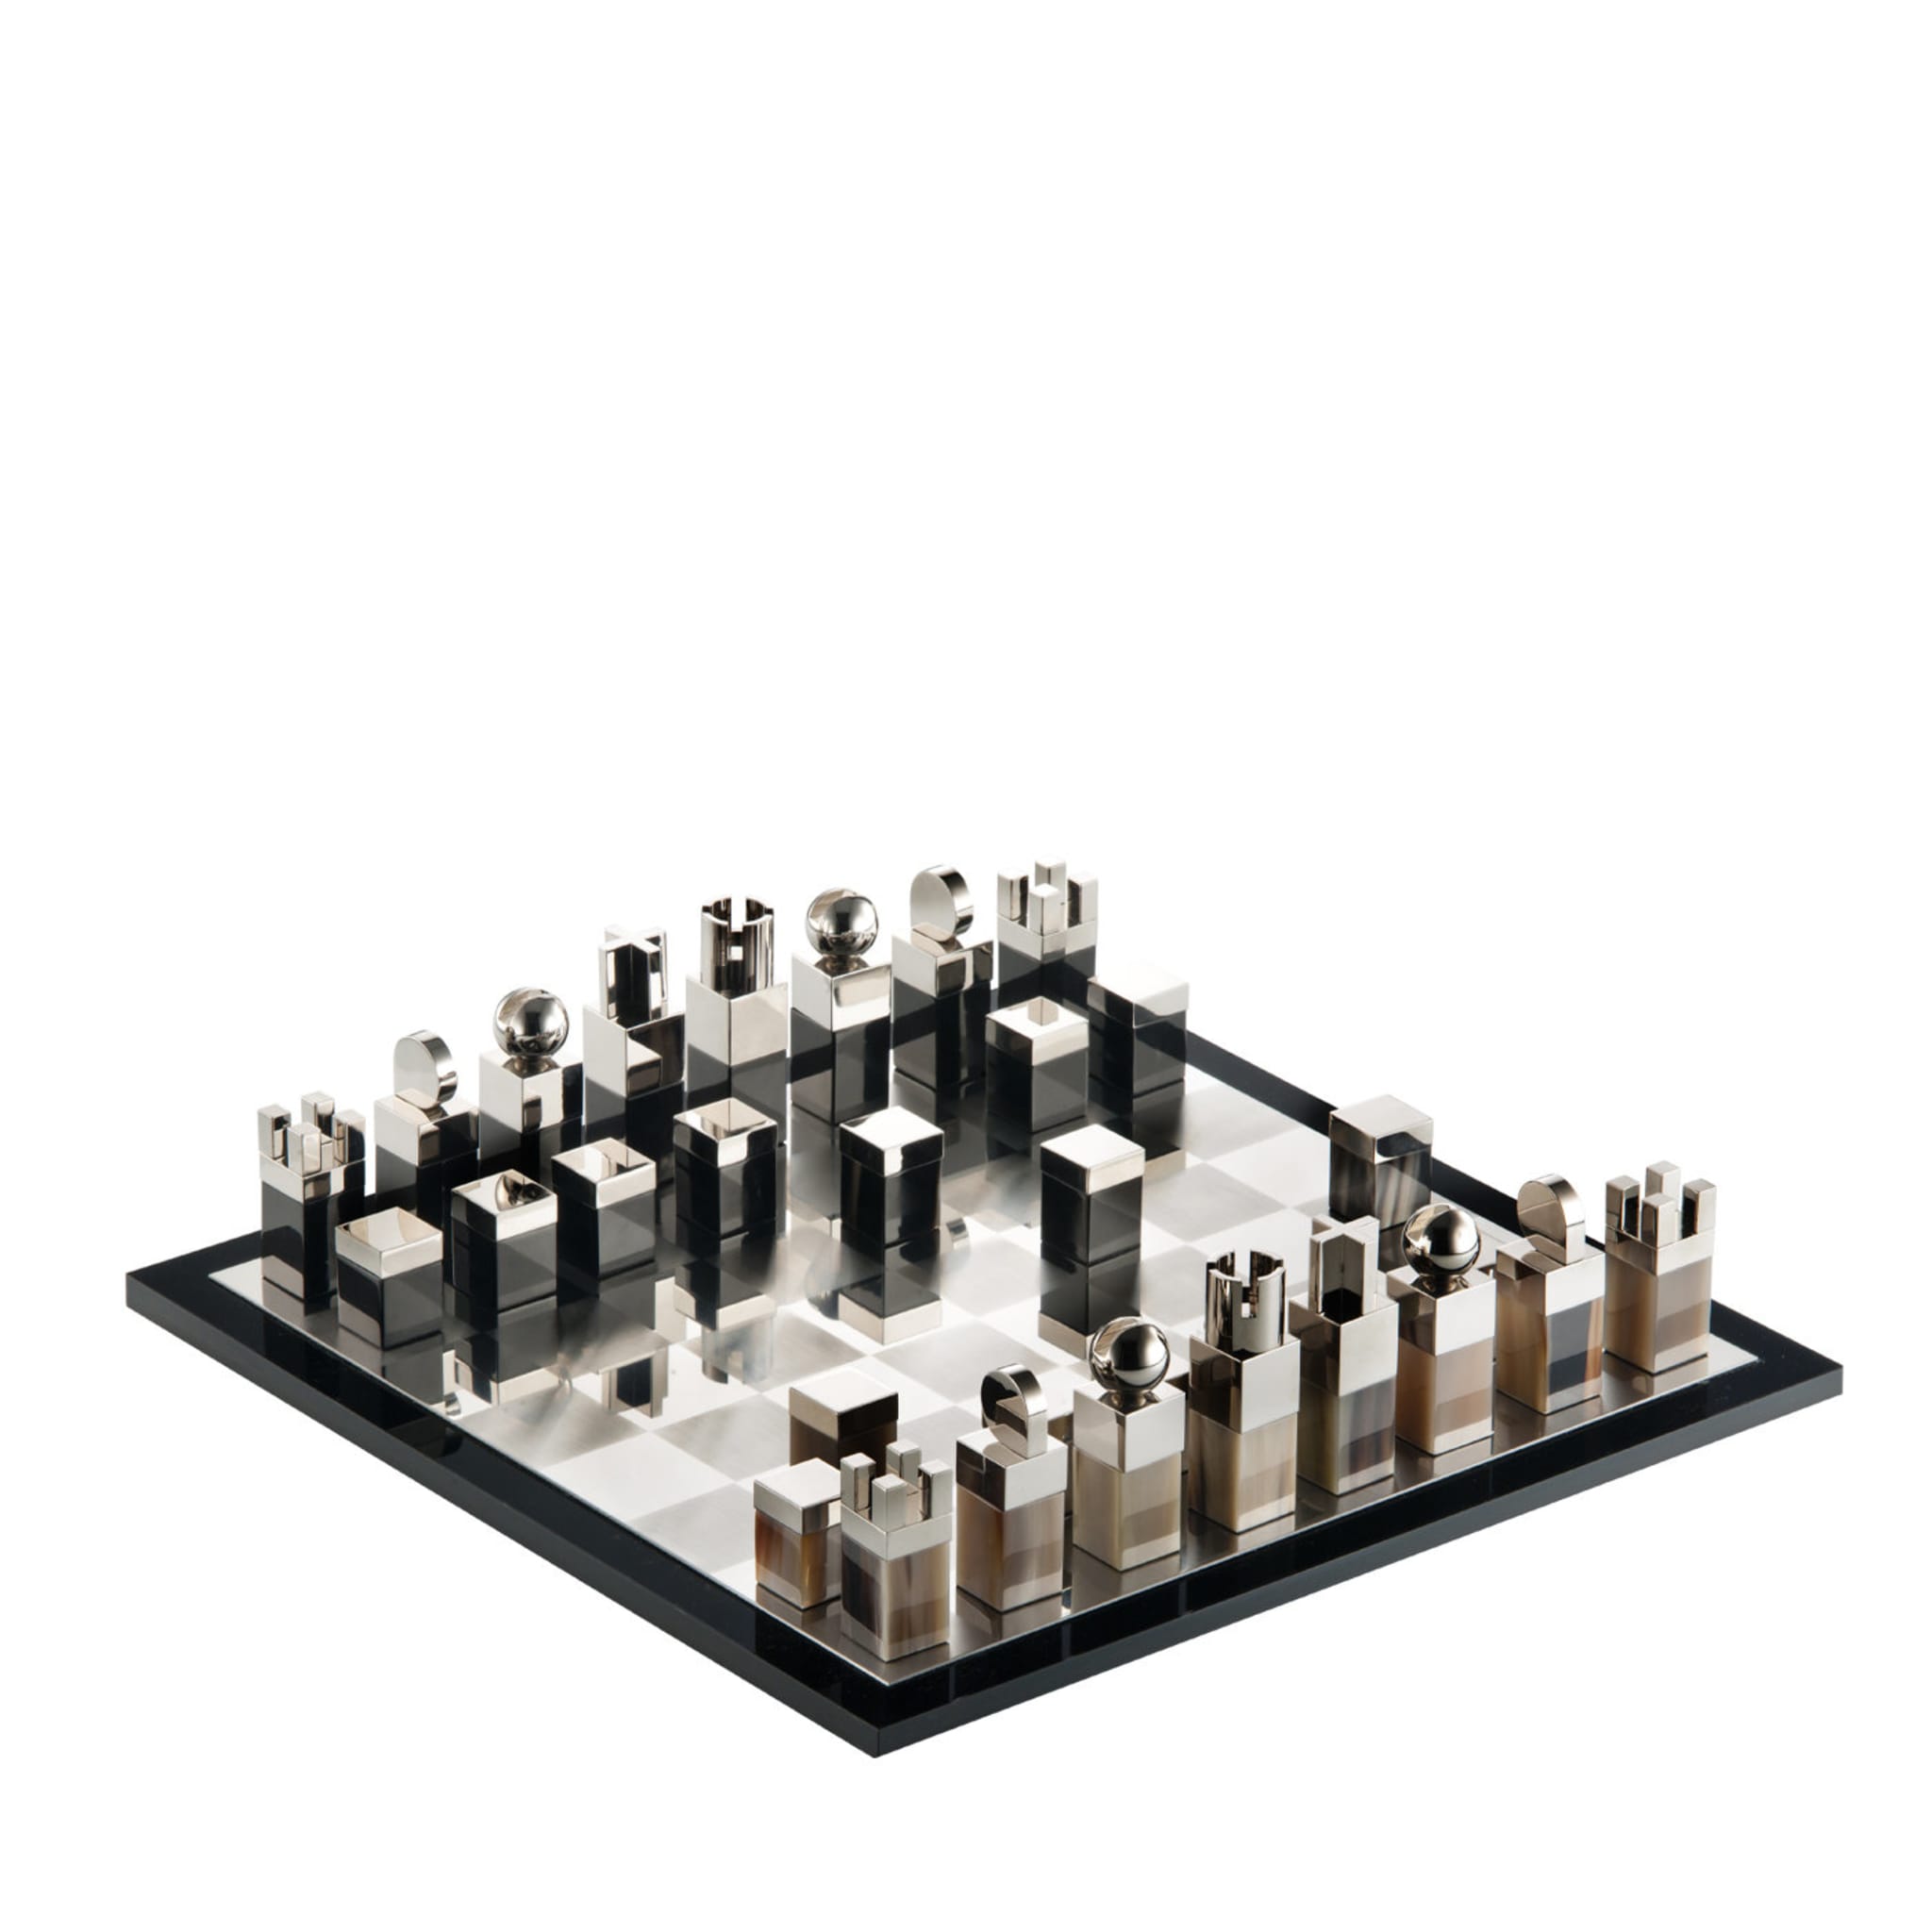 Nelson Chess Set by A. Andreucci - Main view